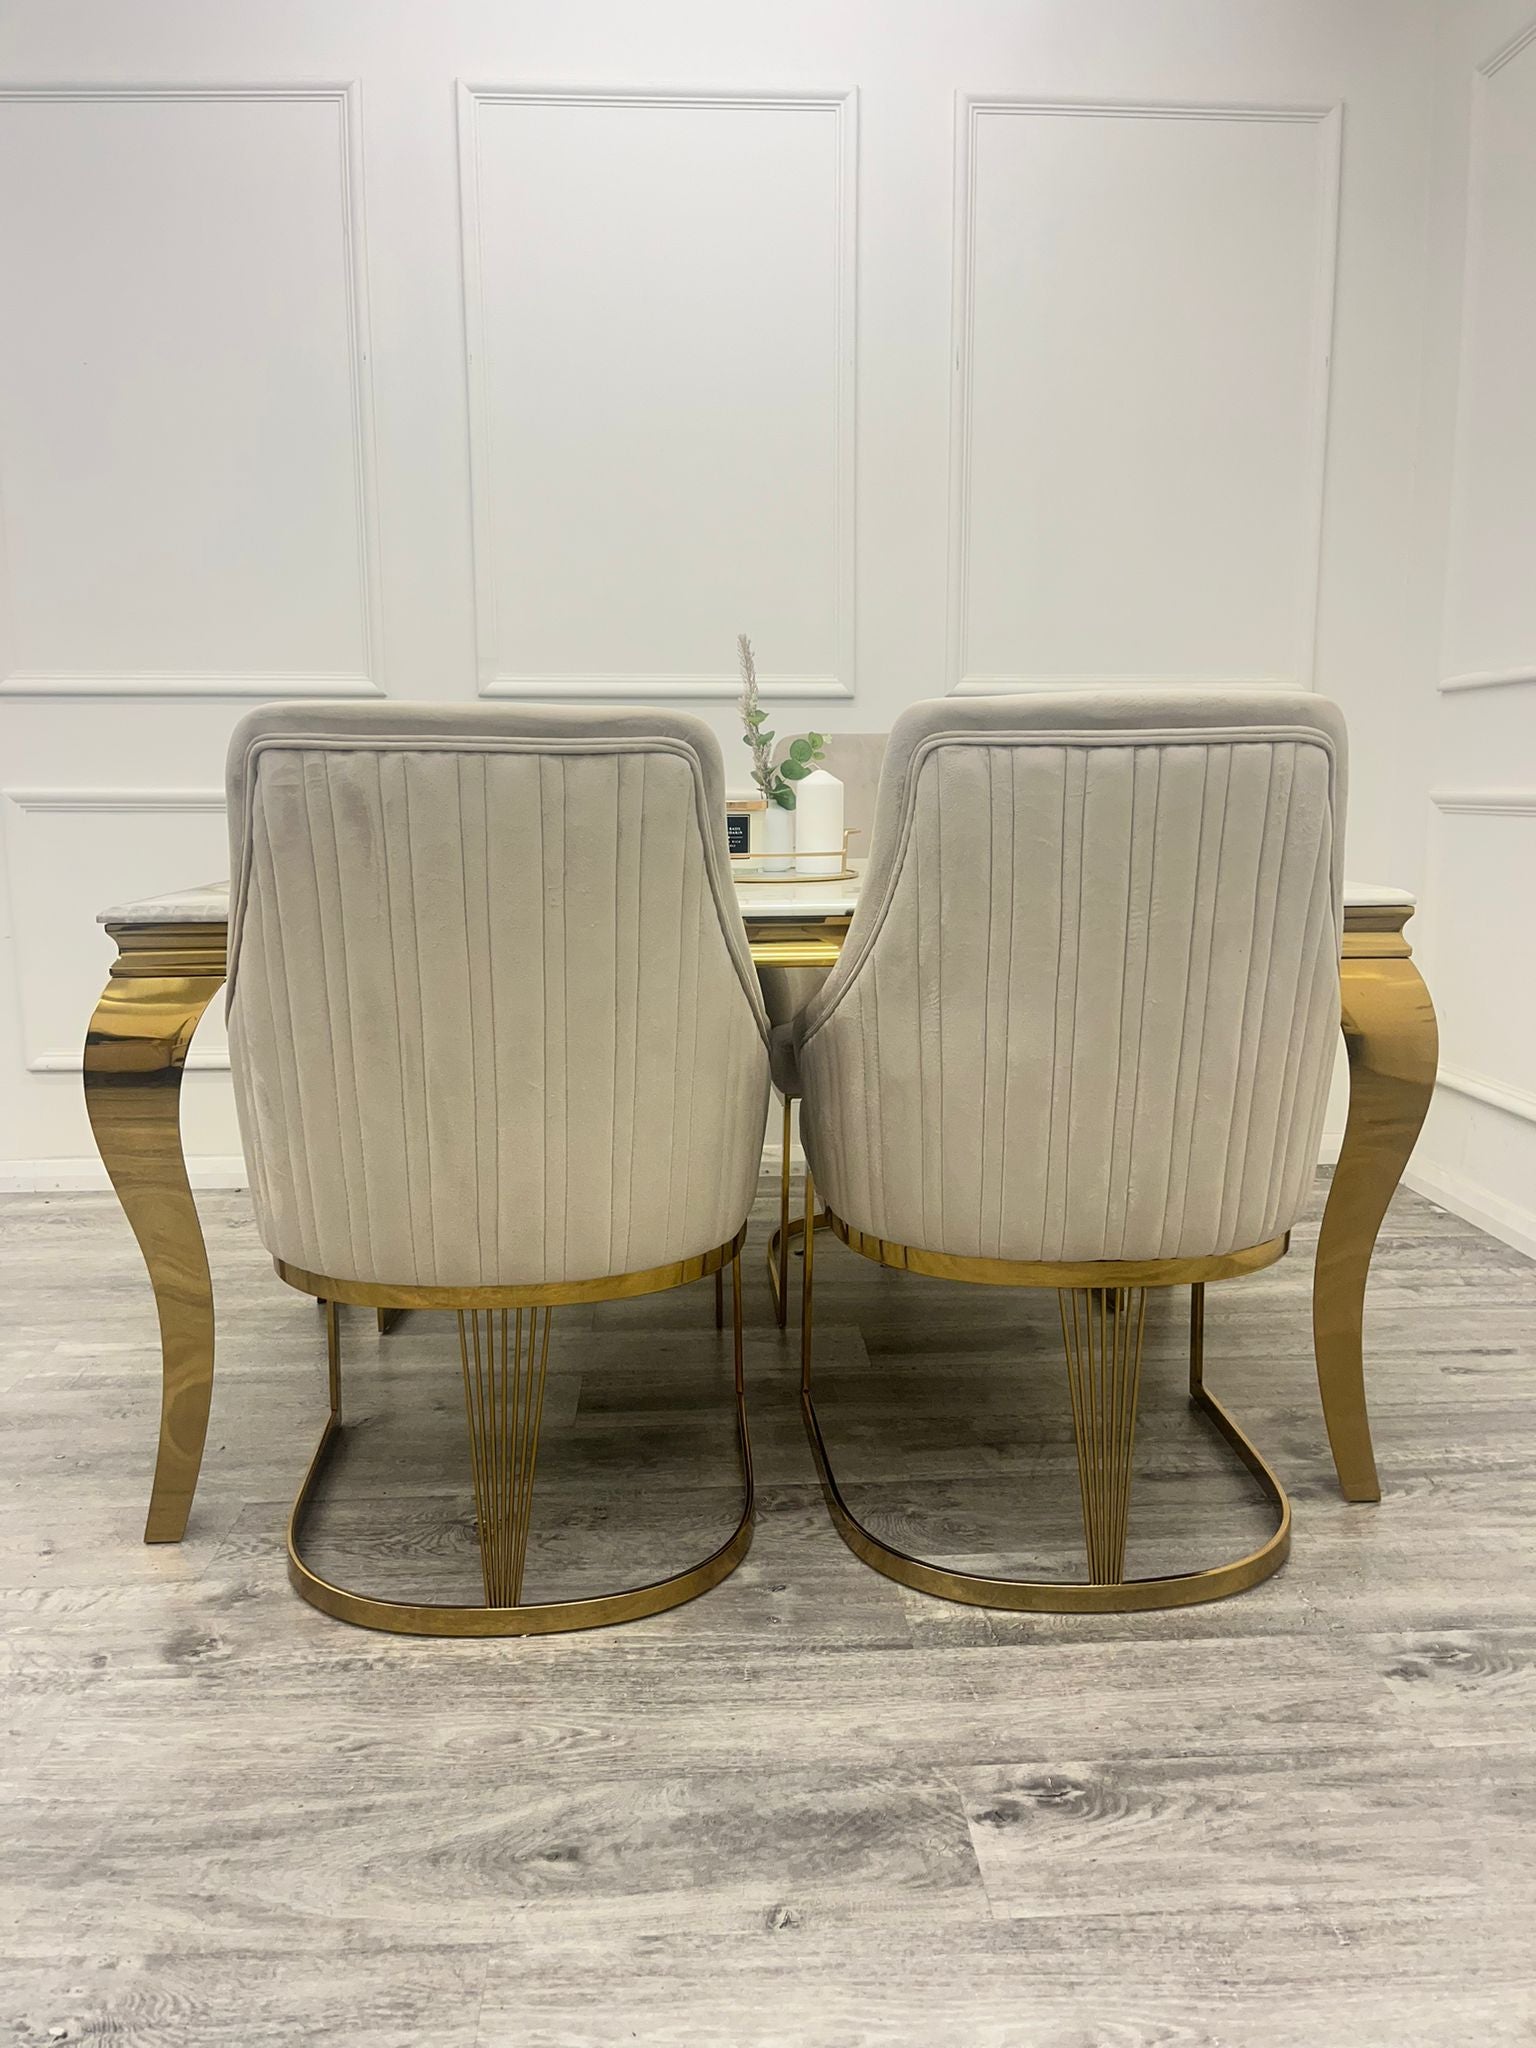 1.8 Louis Gold Marble Dining Set with Chelmsford Gold Chairs